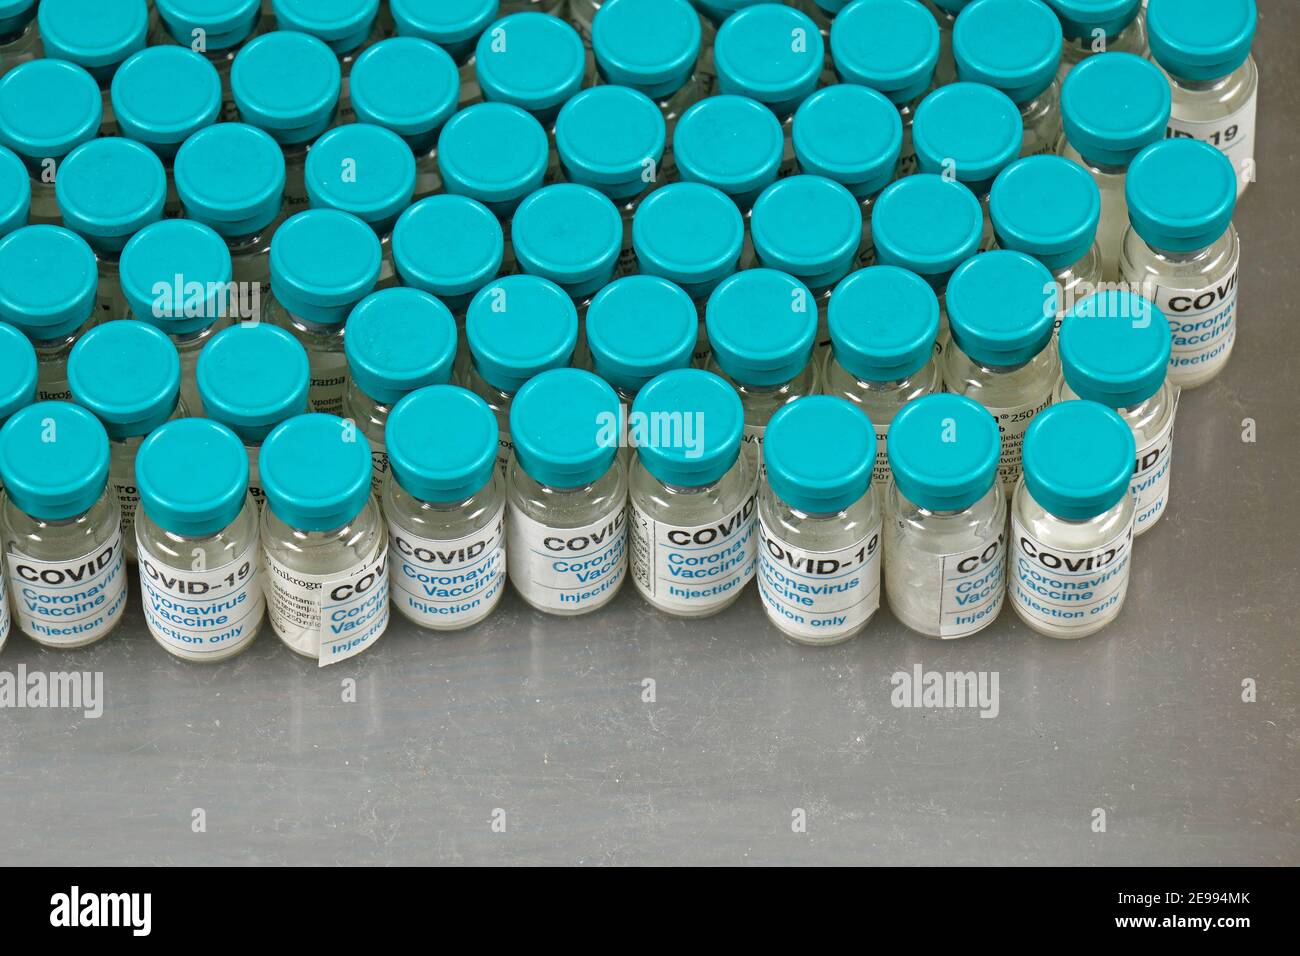 Covid-19 vaccine vials production manufacturing in pharma industry on laboratory shelf Stock Photo